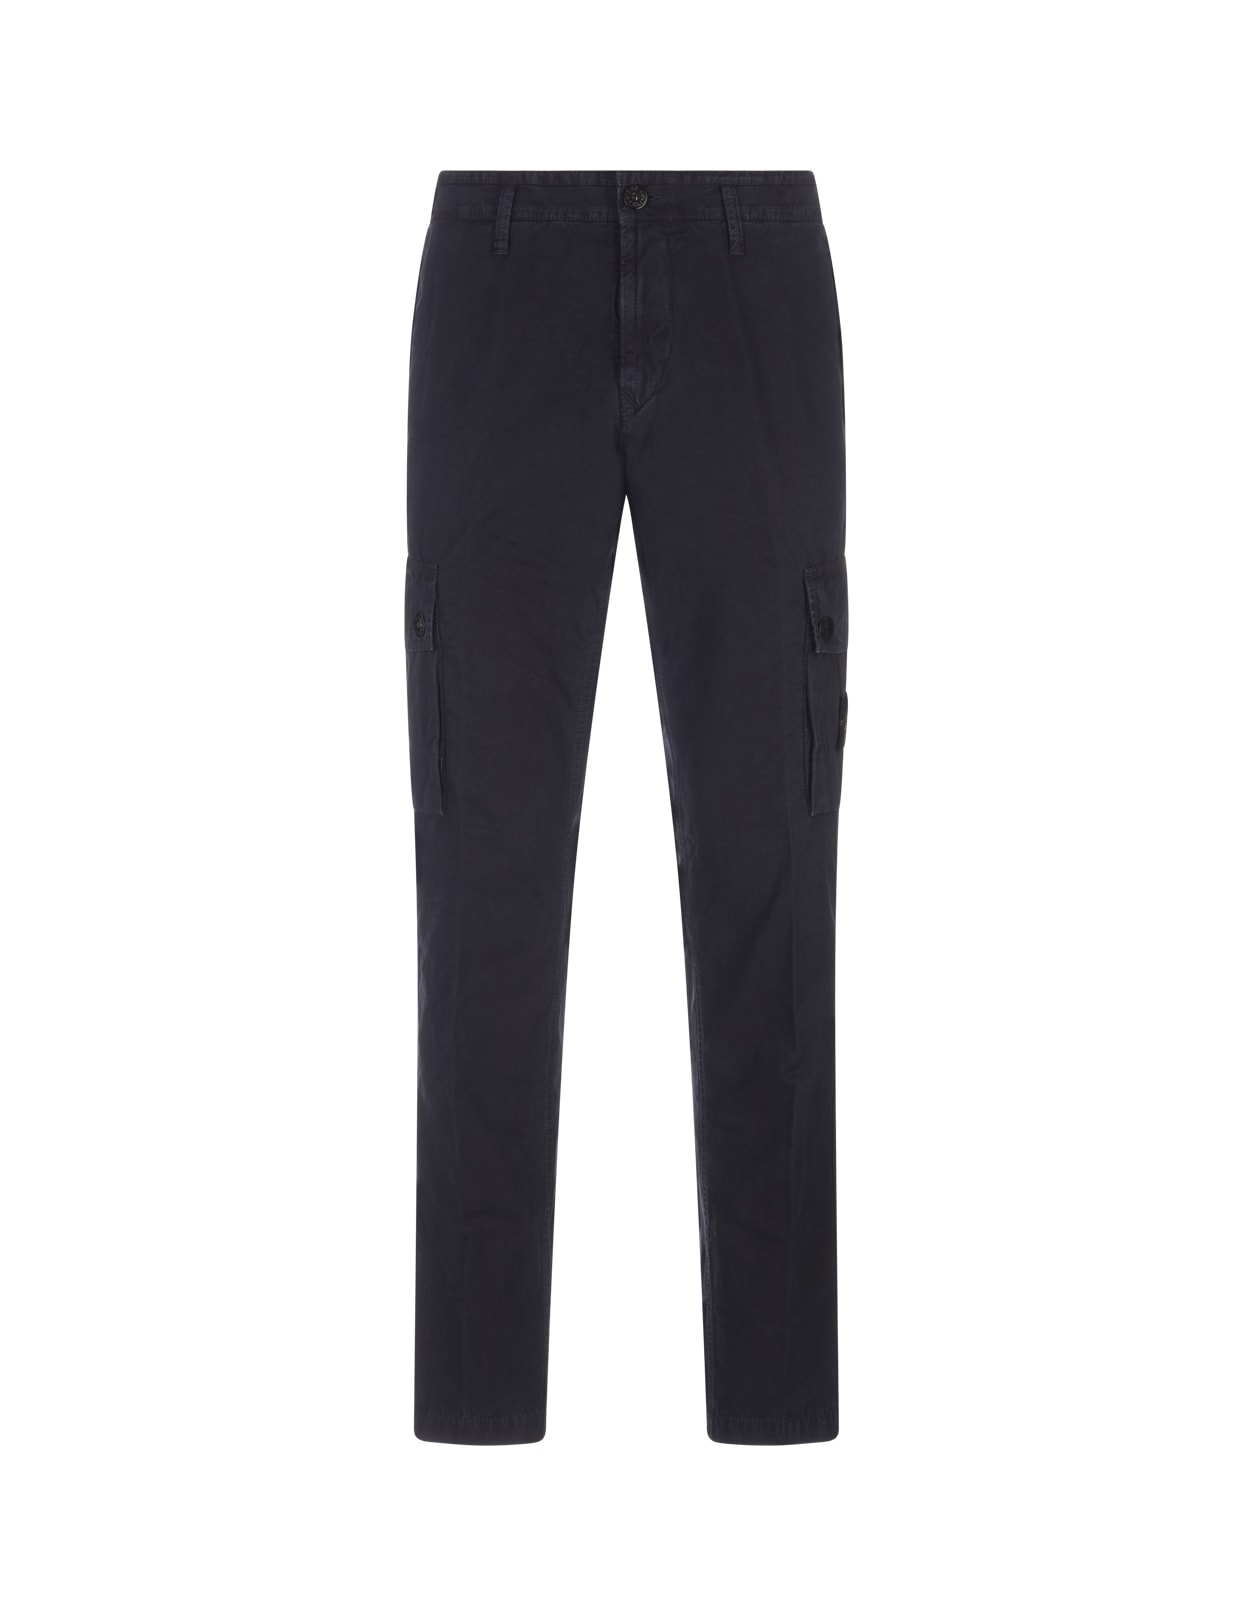 Stone Island Navy Blue Cargo Trousers With Old Effect